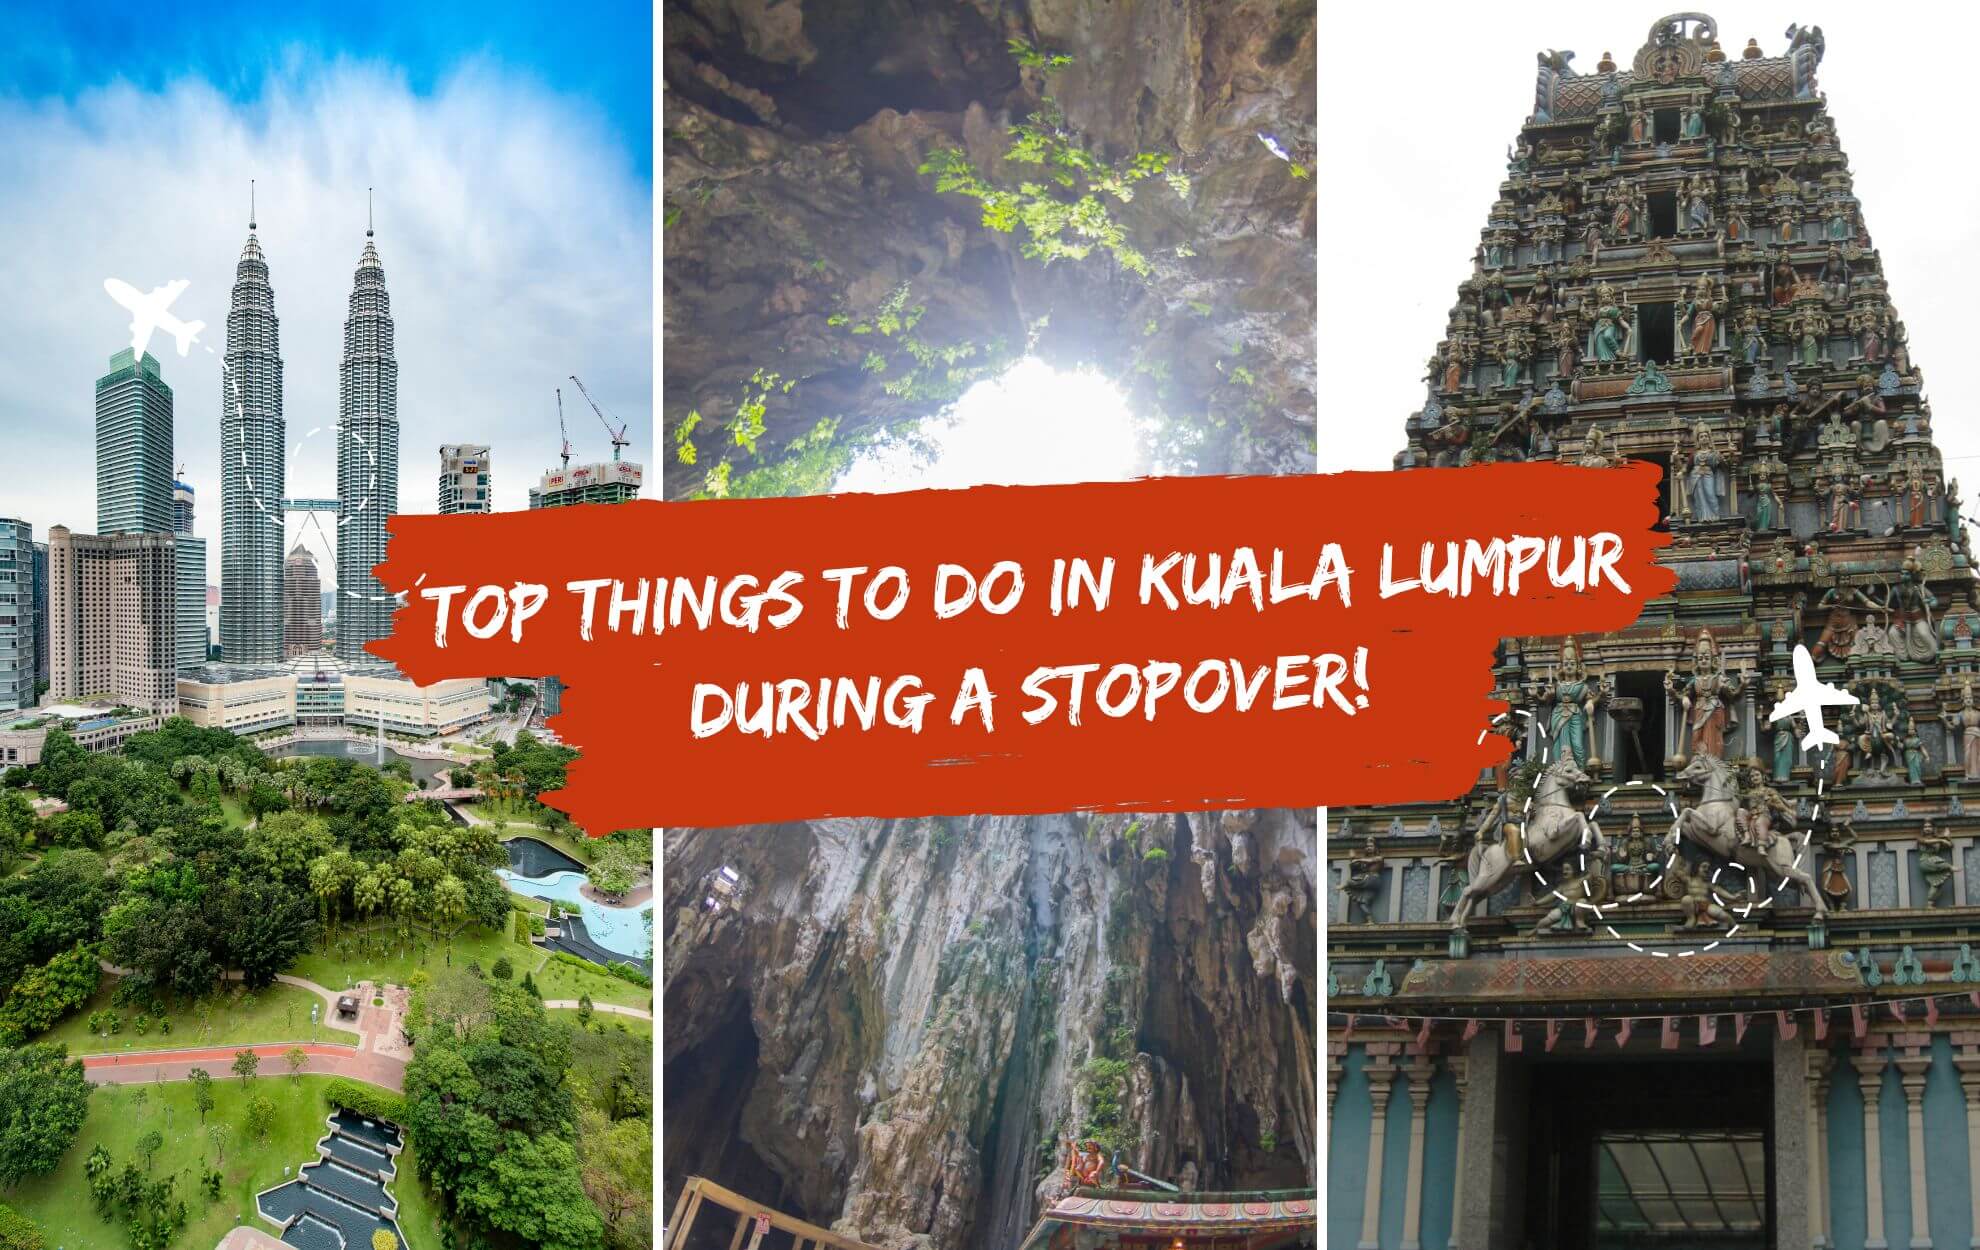 Things to Do in Kuala Lumpur During a Stopover